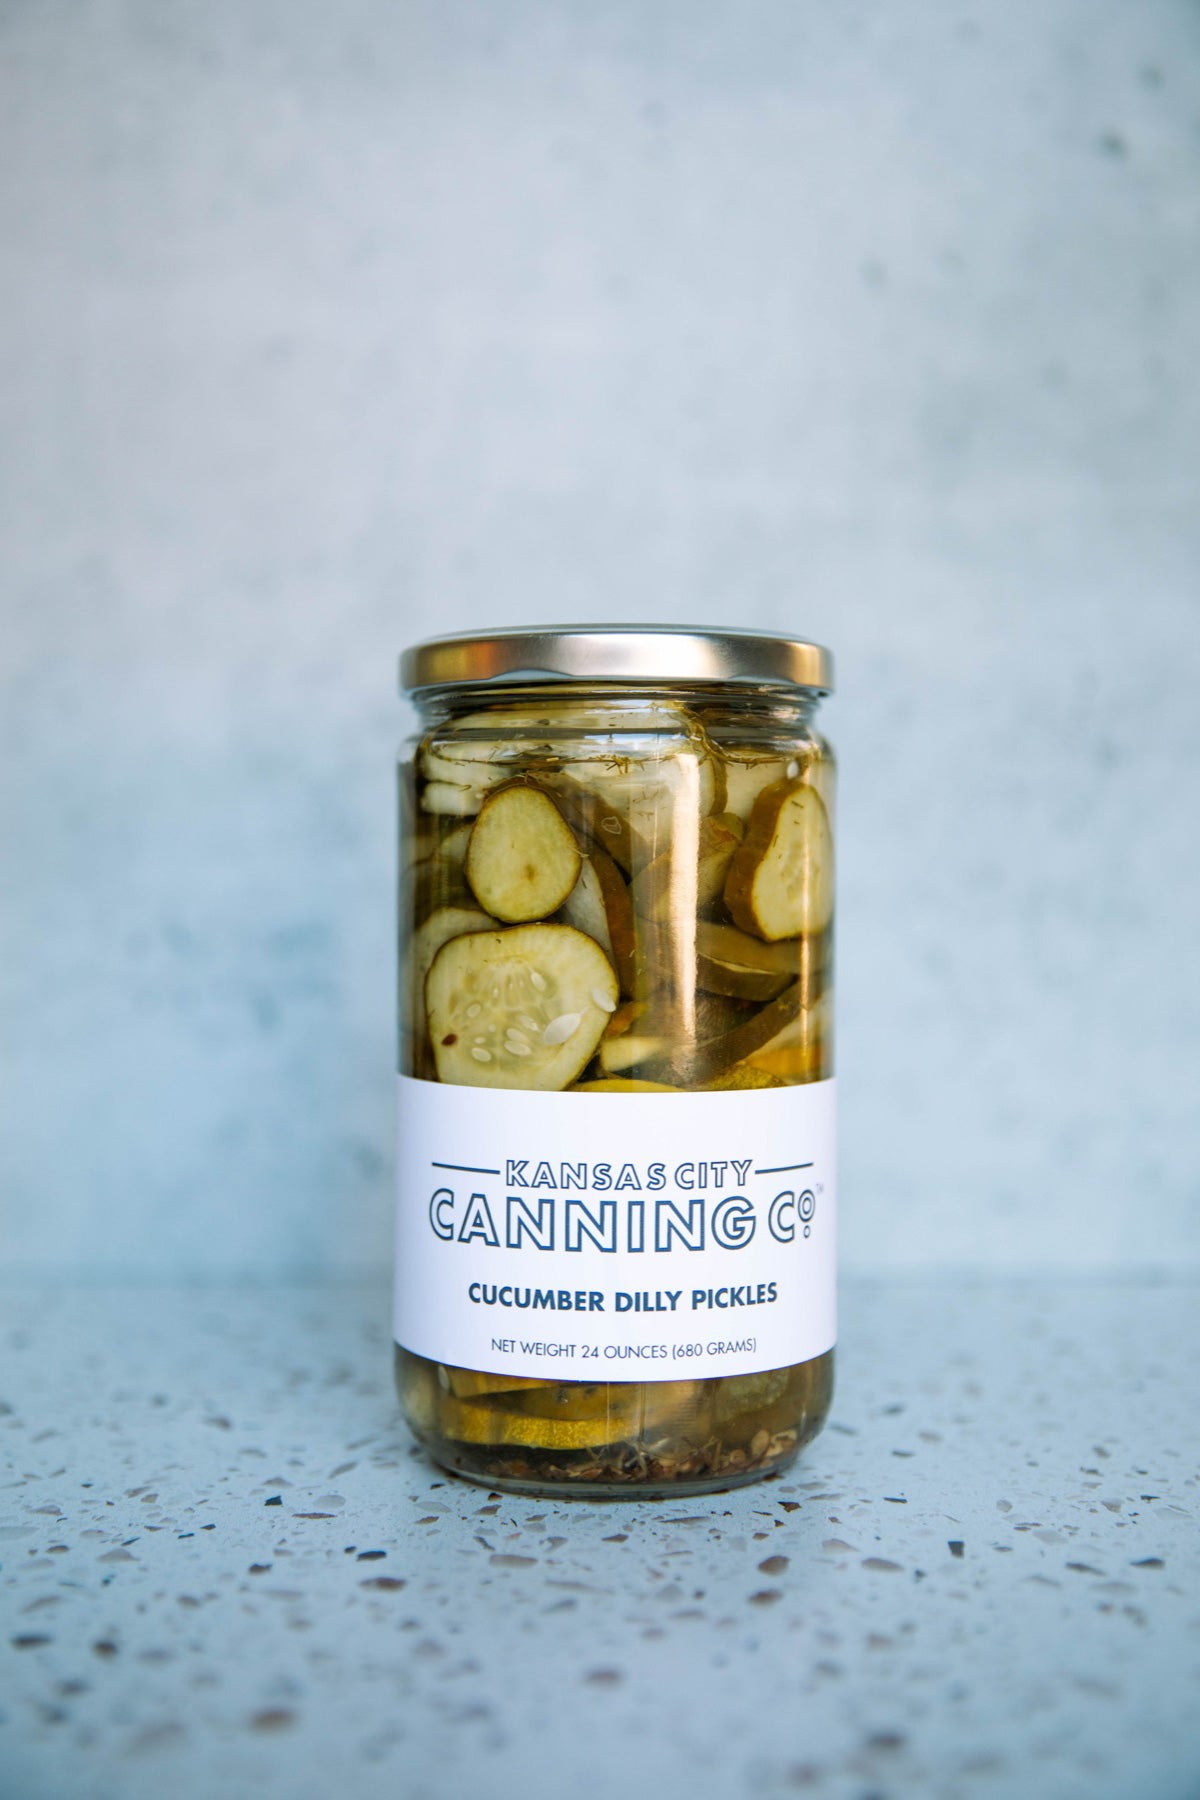 Cucumber Dilly Pickles - Kansas City Canning Co.